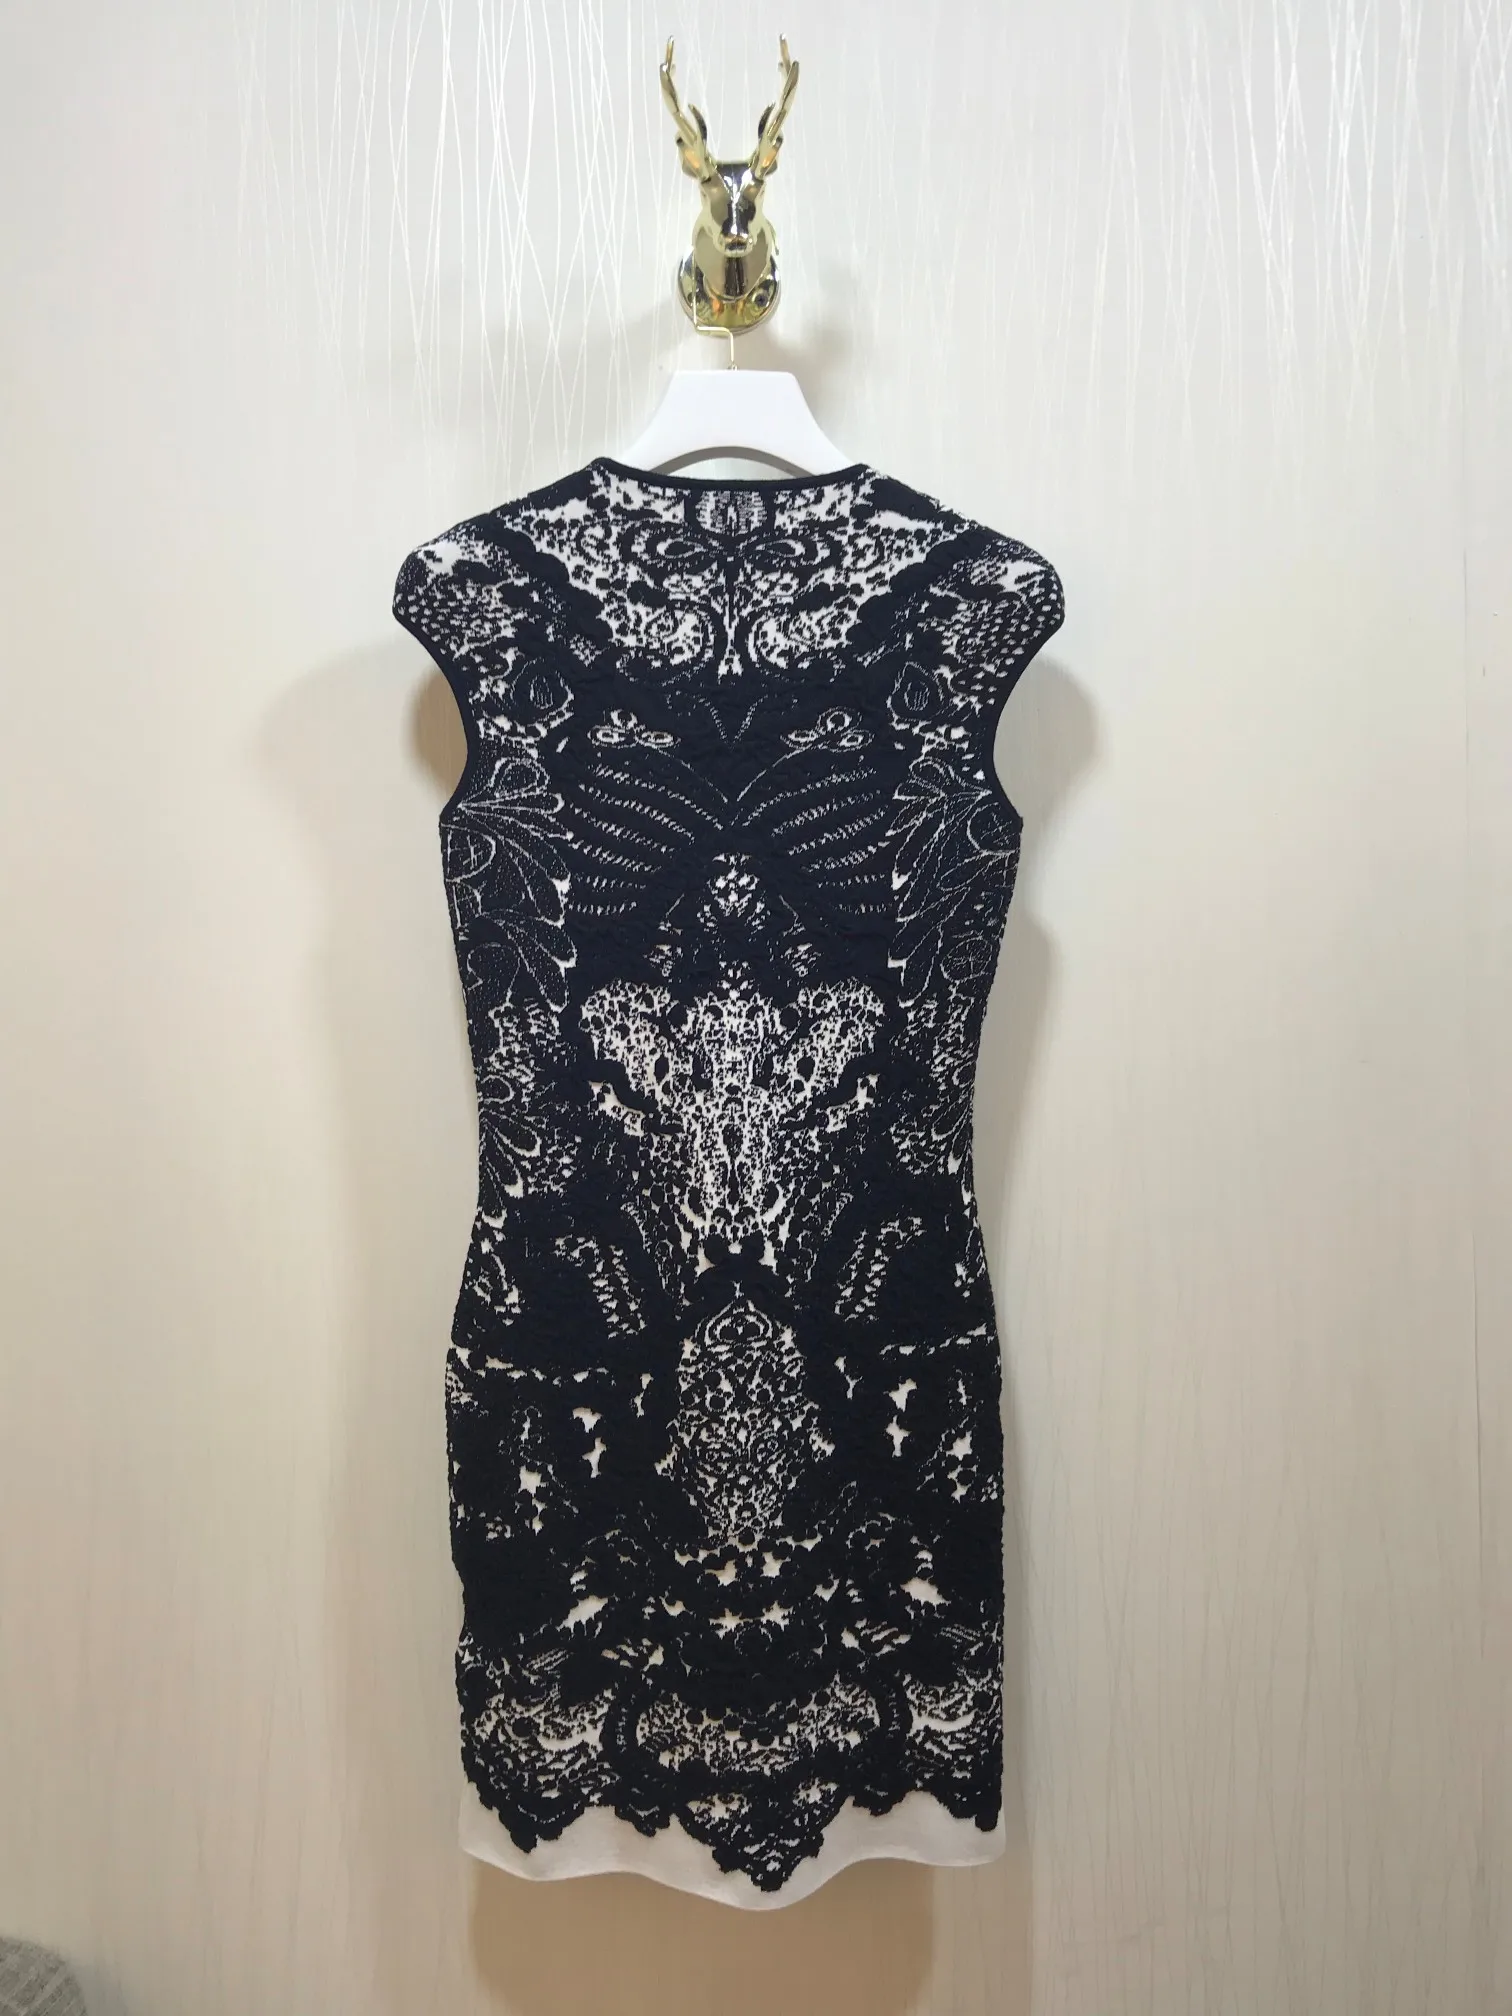 

Summer Vintage 2021 New Women Knitted Jacquard Sleeveless Slim Dresses For Ladies Clothes Ddxgz2 2.04